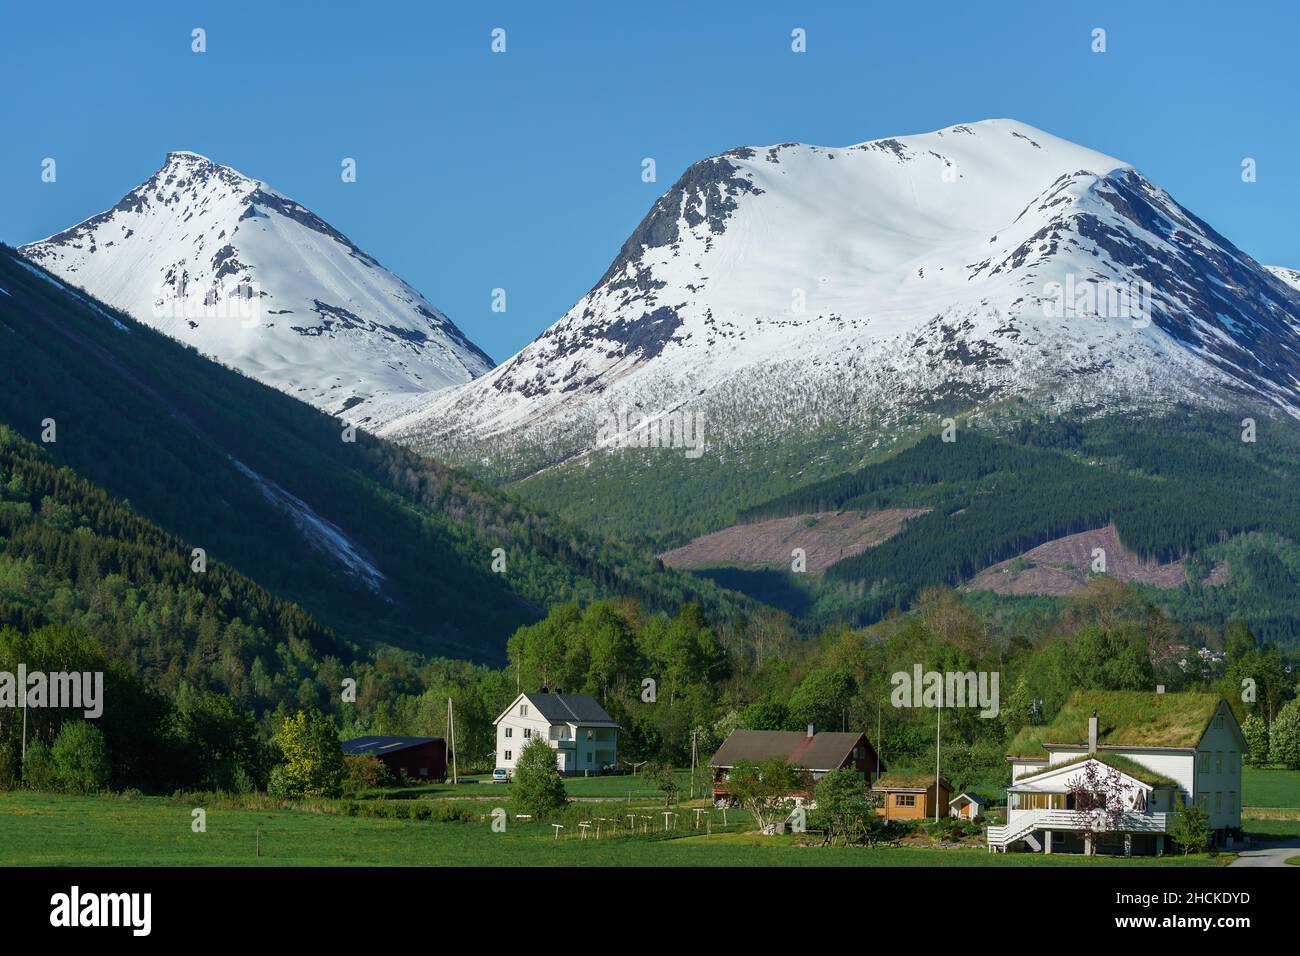 VALLDAL, NORWAY - 2020 MAY 30. Valldal valley with houses and mountains with snow on. Stock Photo